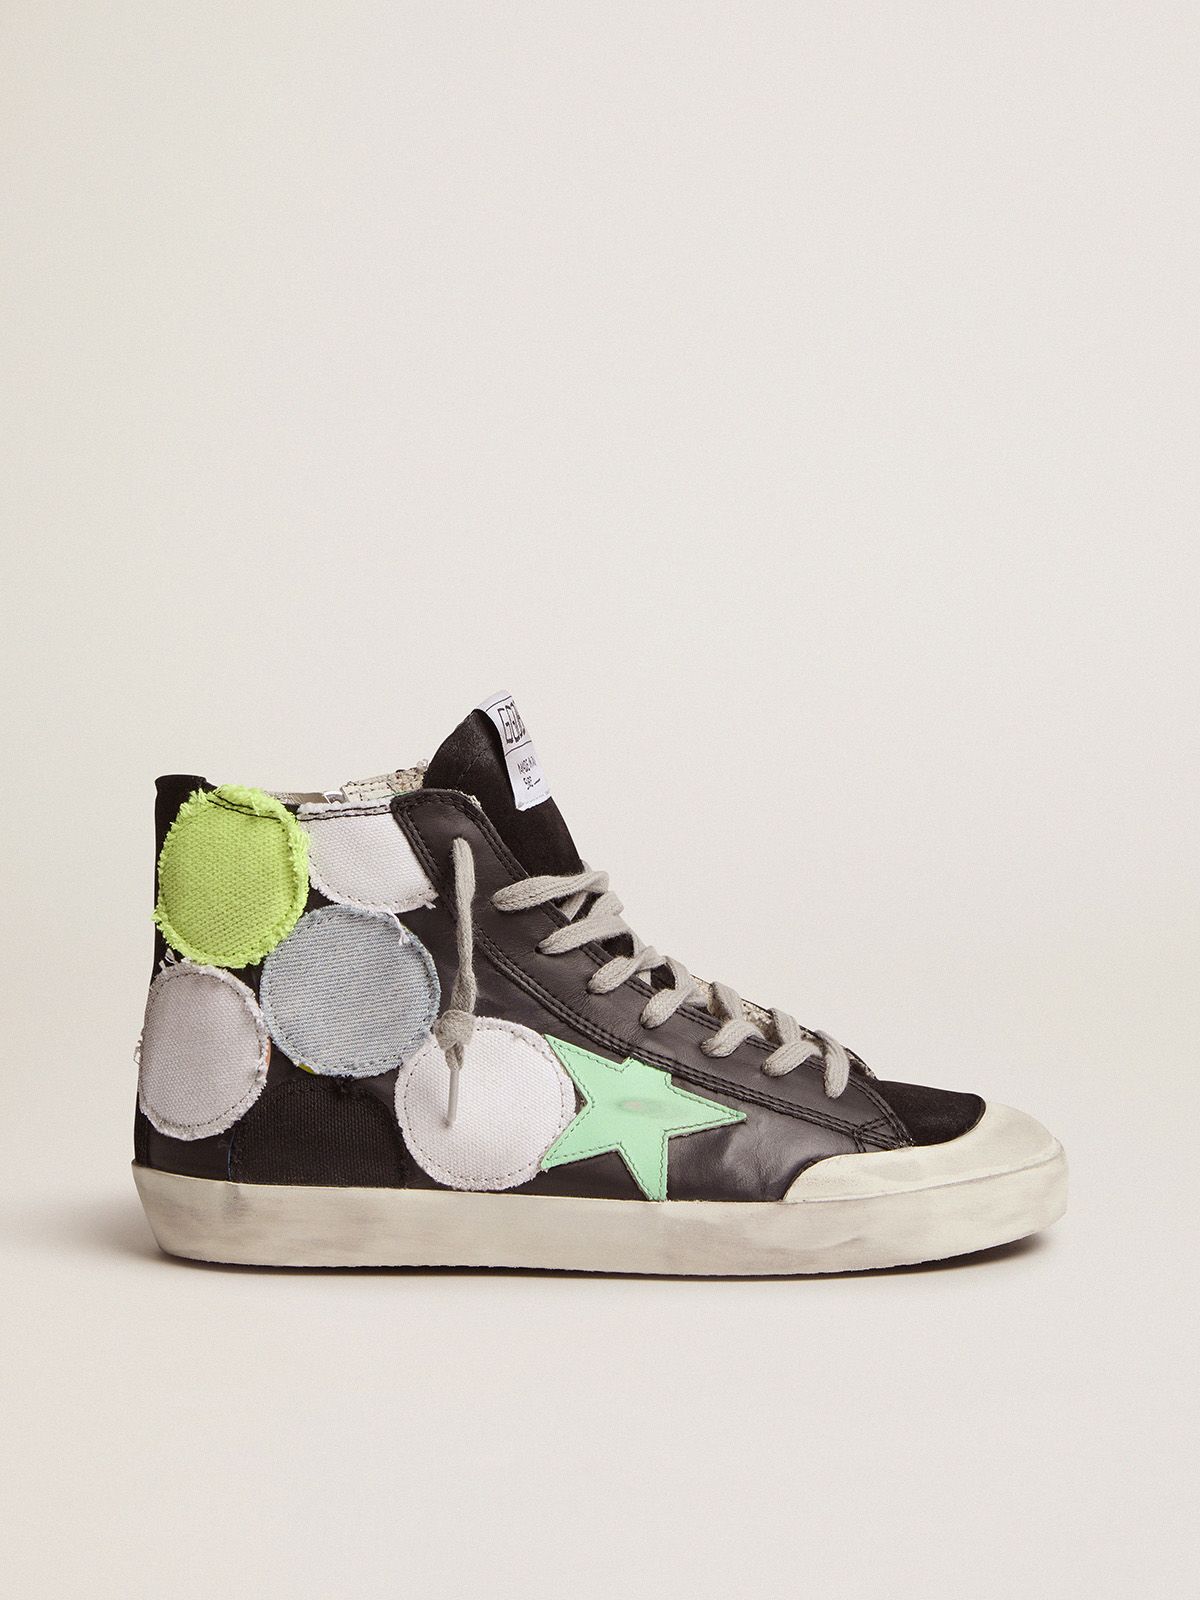 golden goose polka-dot coloured patches Francy with sneakers Maker Penstar Collection Dream